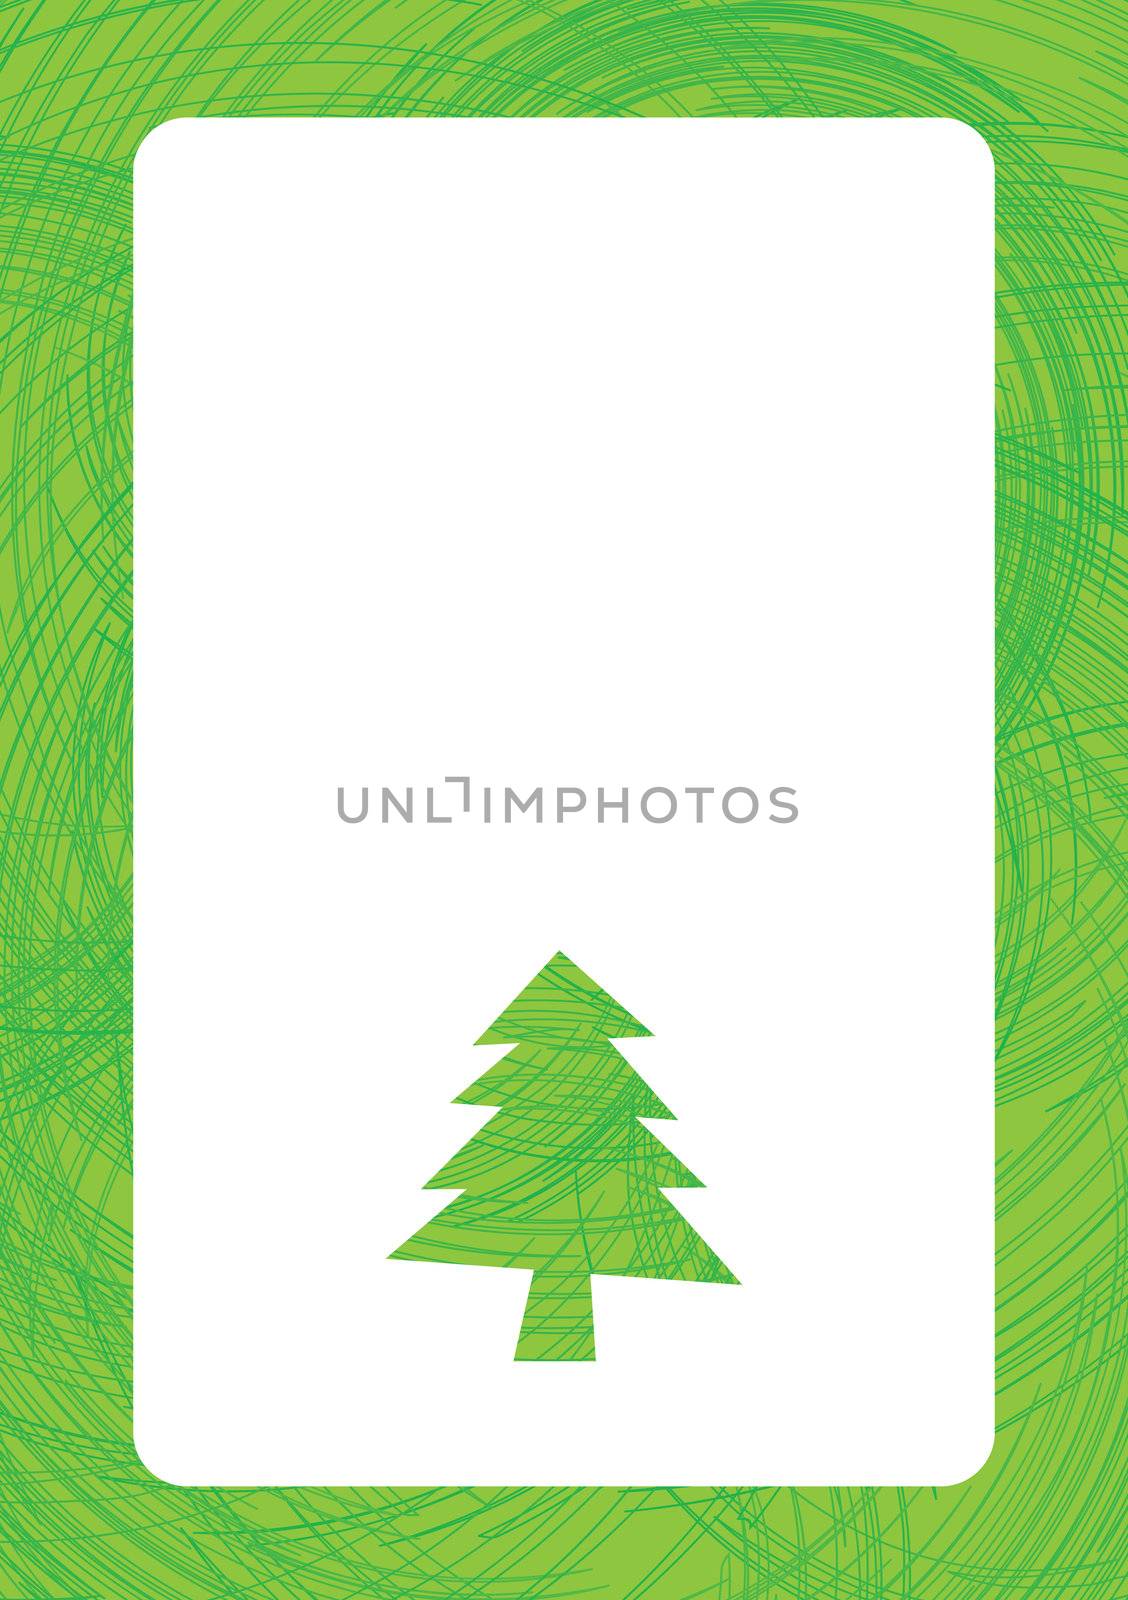 Greeting for text with christmas tree background